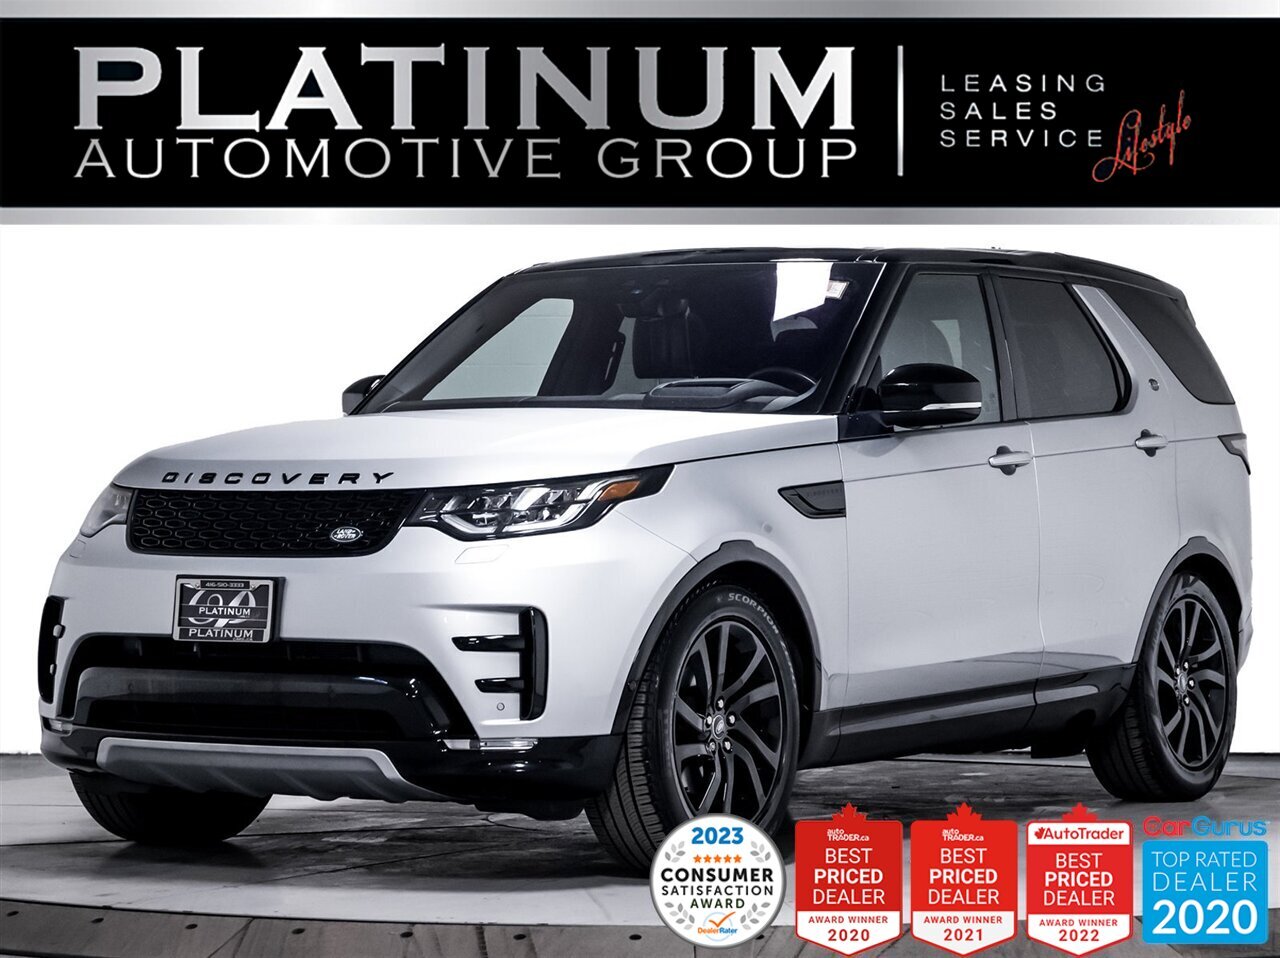 2020 Land Rover Discovery HSE LUXURY TD6,7 PASSENGER,MASSAGE SEATS,MERIDIAN